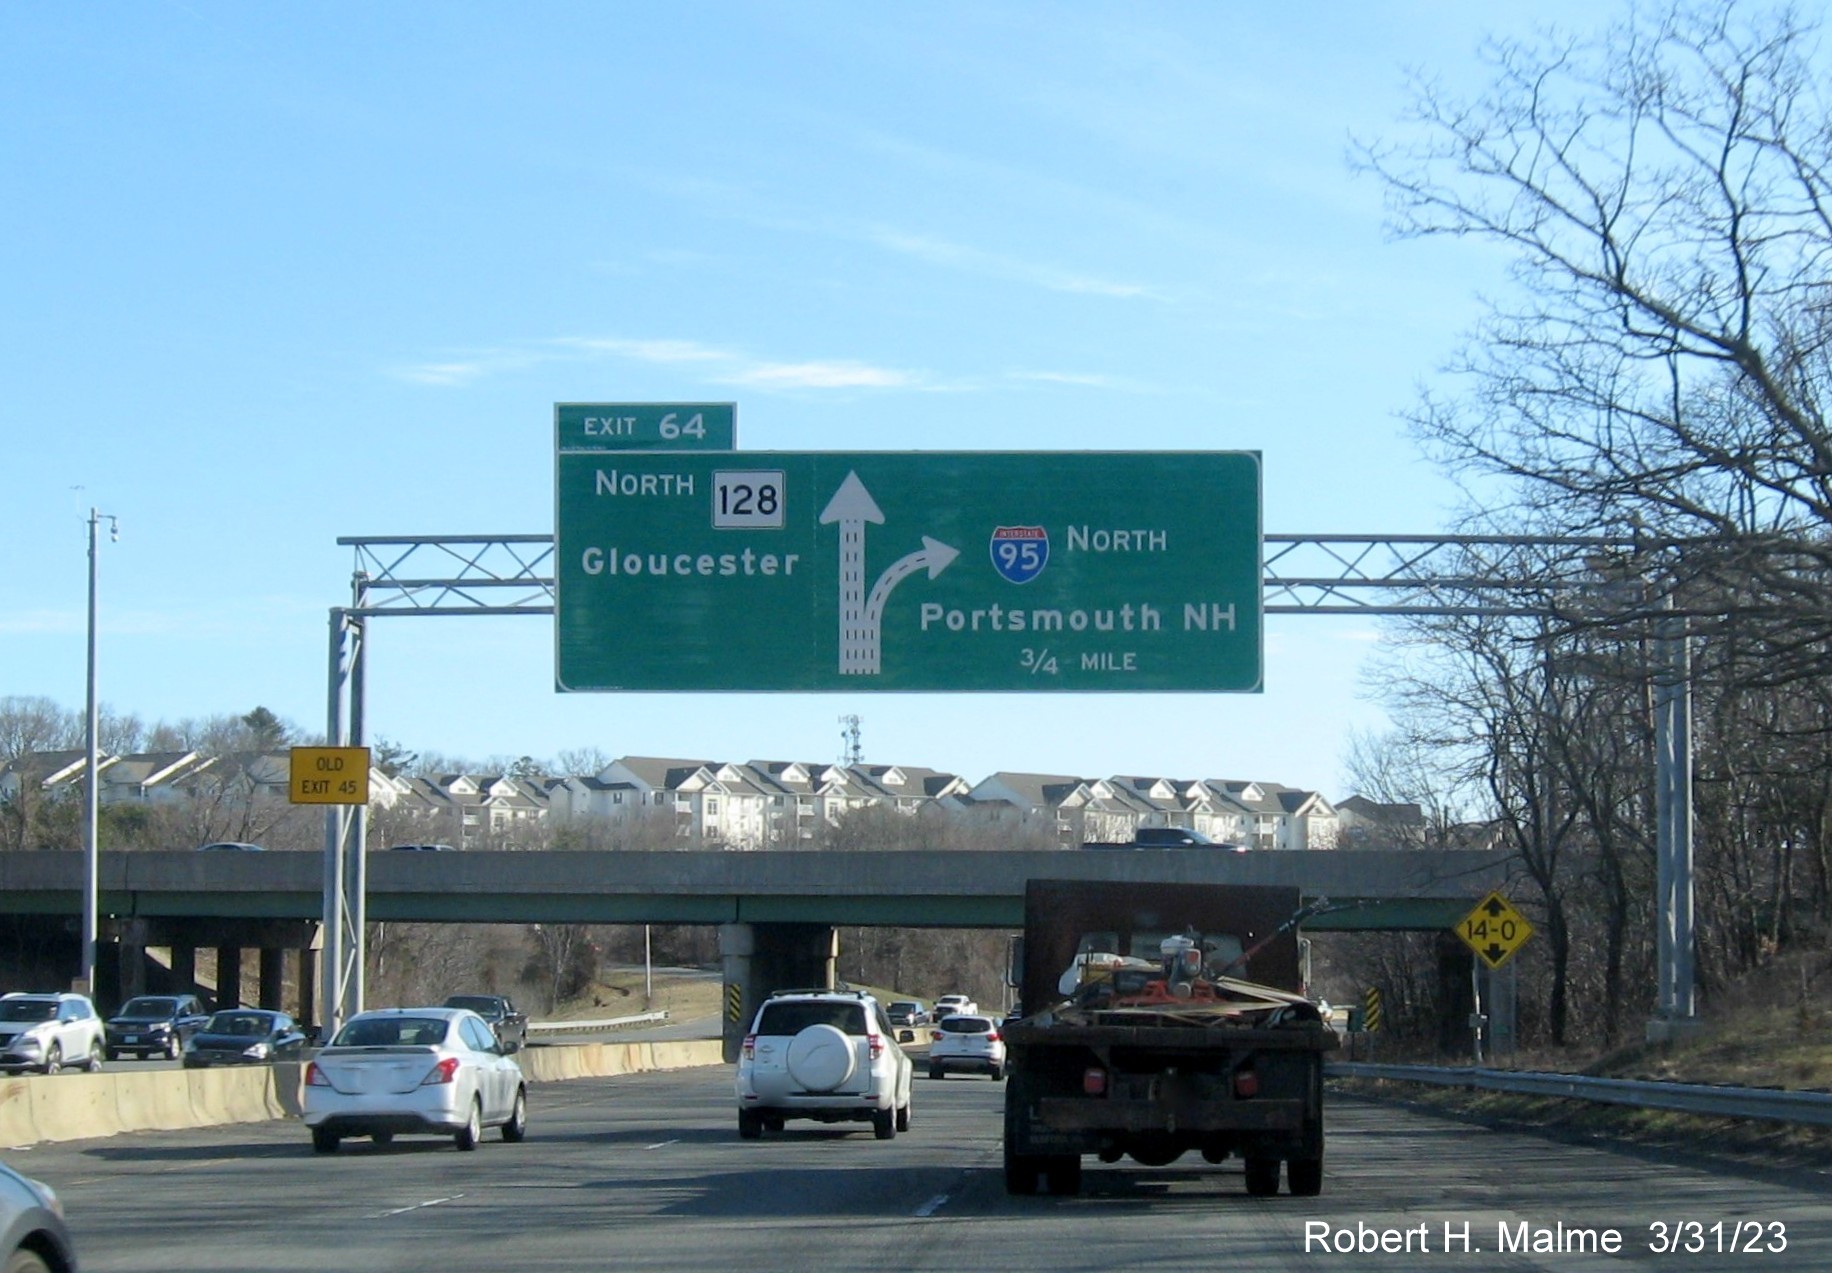 Image of recently replaced 3/4 mile advance diagrammatic sign for MA 128 North exit on I-95 North in Peabody, March 2023